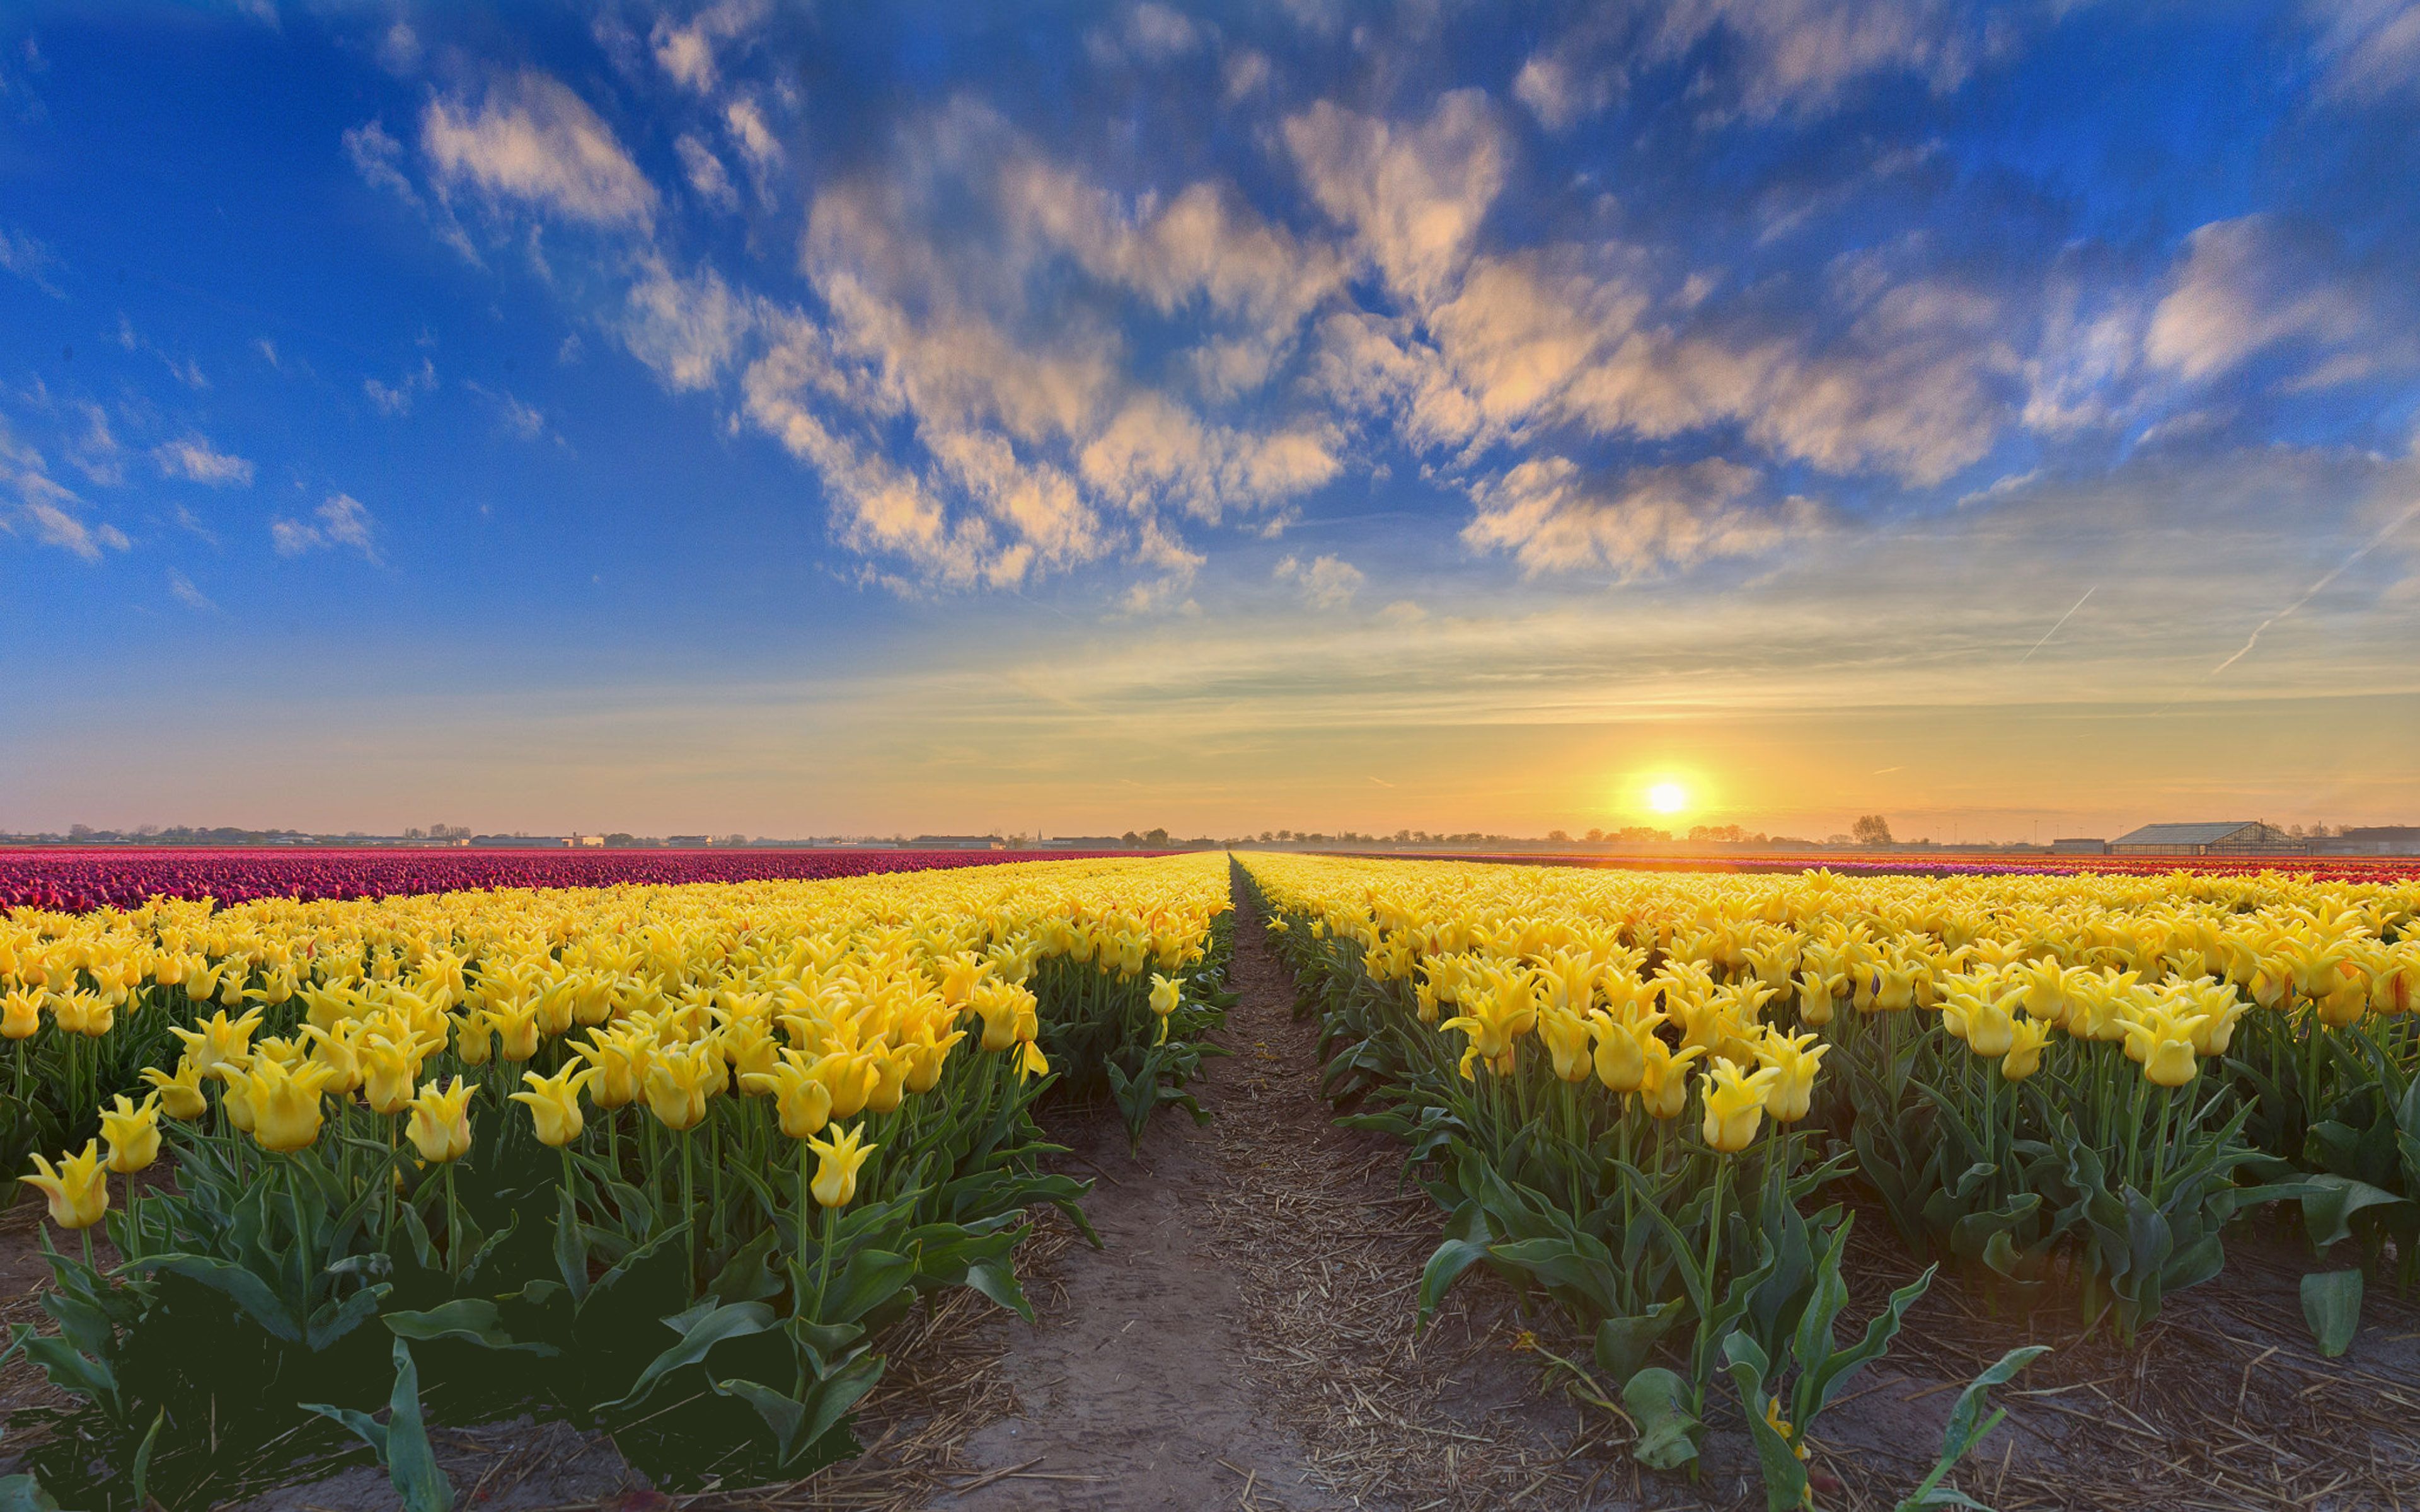 Gold Sunset Netherlands Spring Flowers Plantation With Yellow Red And Pink Tulips 4k Ultra HD Tv Wallpaper For Desktop Laptop Tablet And Mobile Phones 3840x2400, Wallpaper13.com